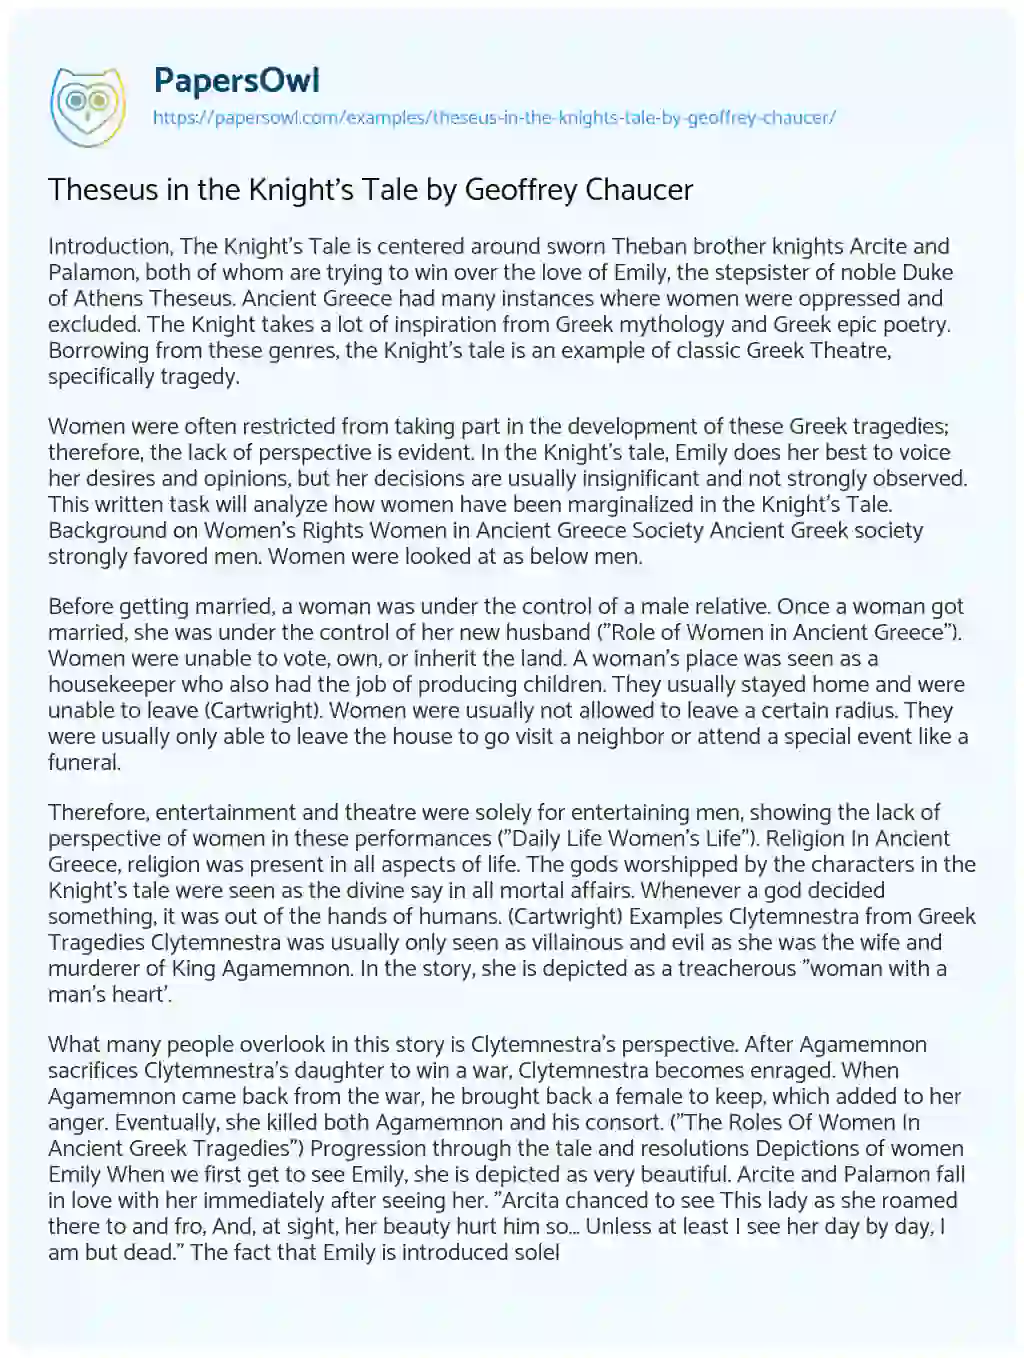 Essay on Theseus in the Knight’s Tale by Geoffrey Chaucer